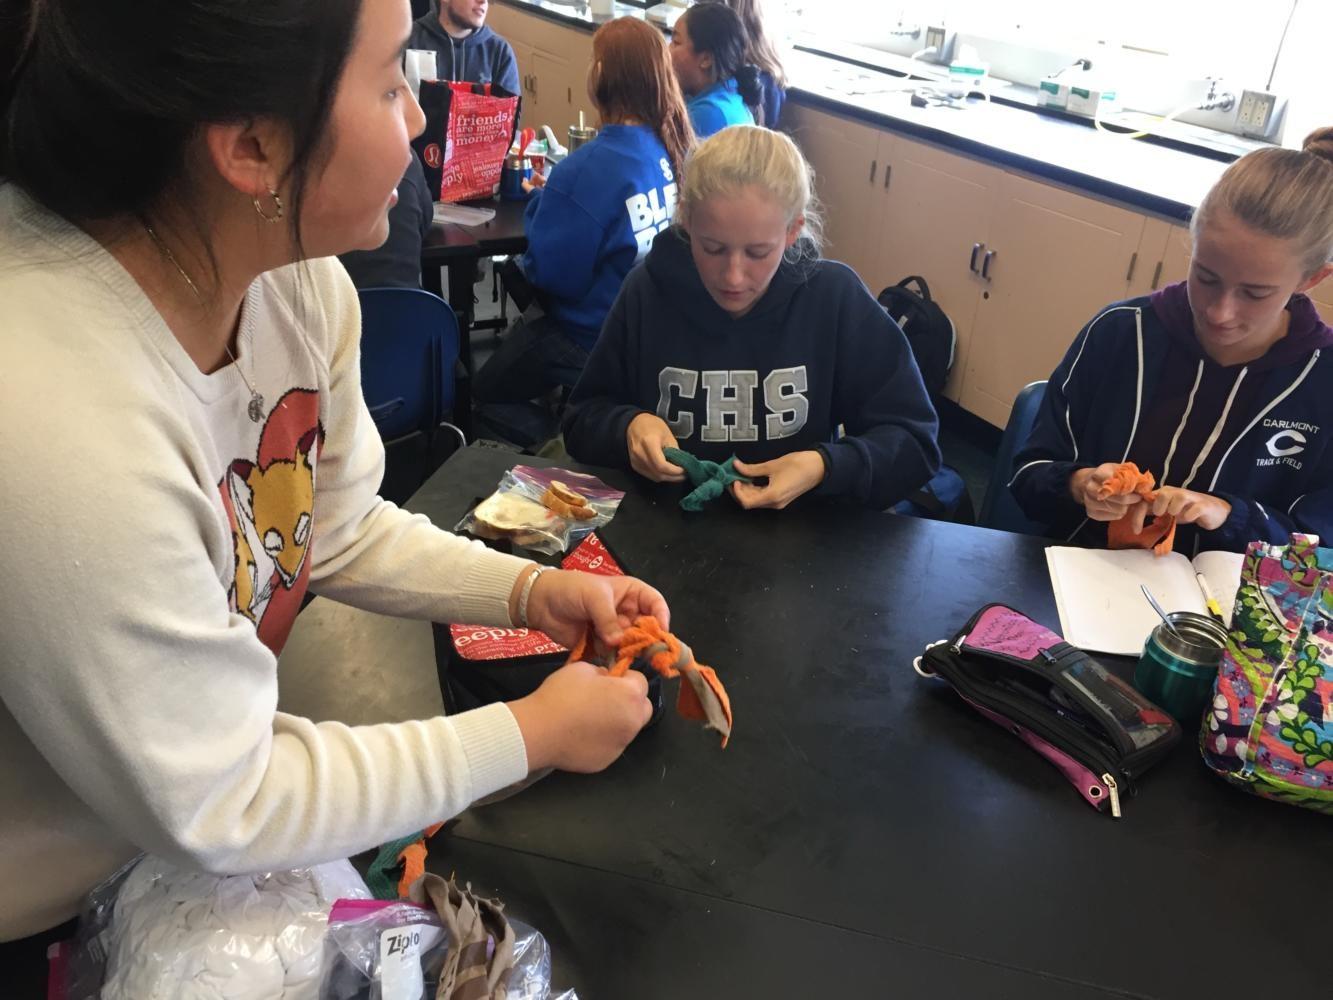 At their past meeting, members of Hope Brigade created toys from shredded tags and shirts for shelter animals. Club President Cindy Chen, a freshman, teaches club members how to make these toys.